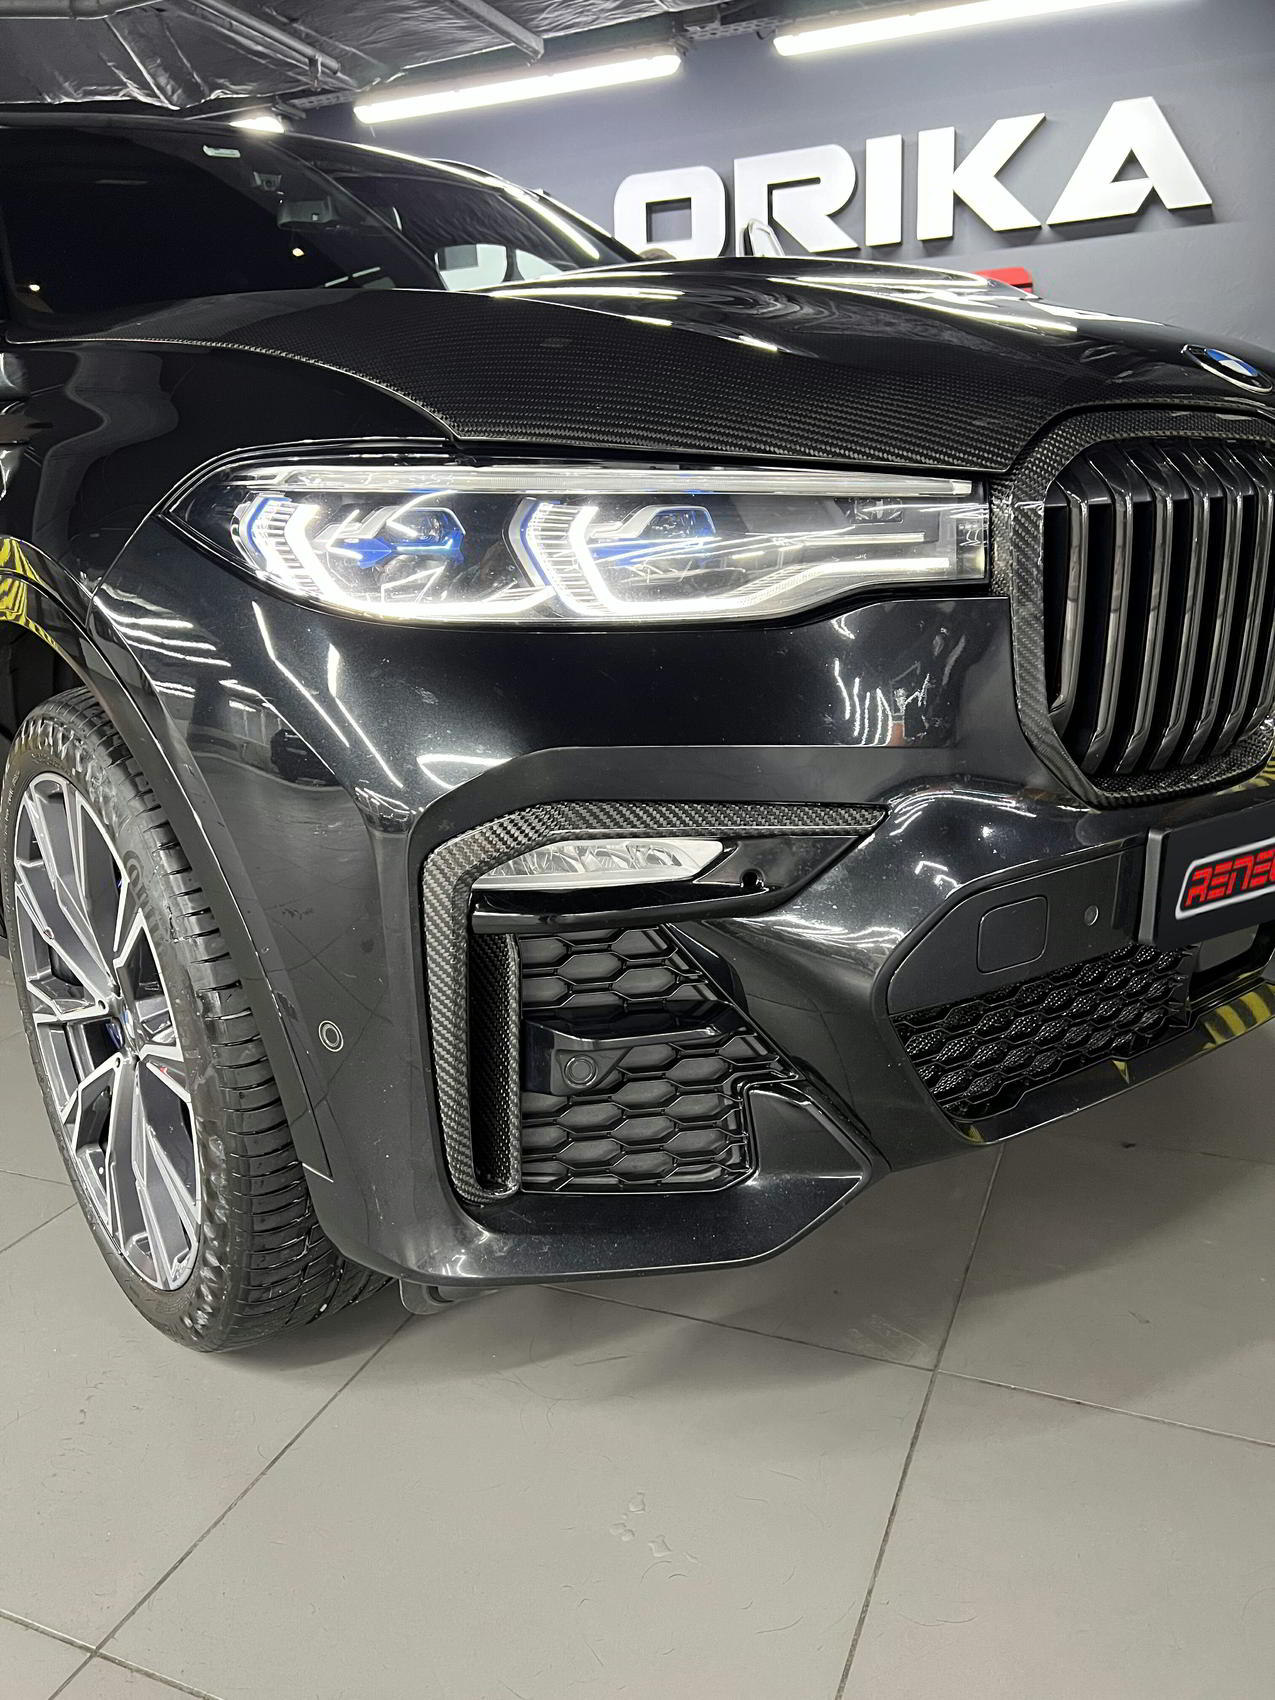 Check our price and buy Renegade Design body kit for BMW X7 G07